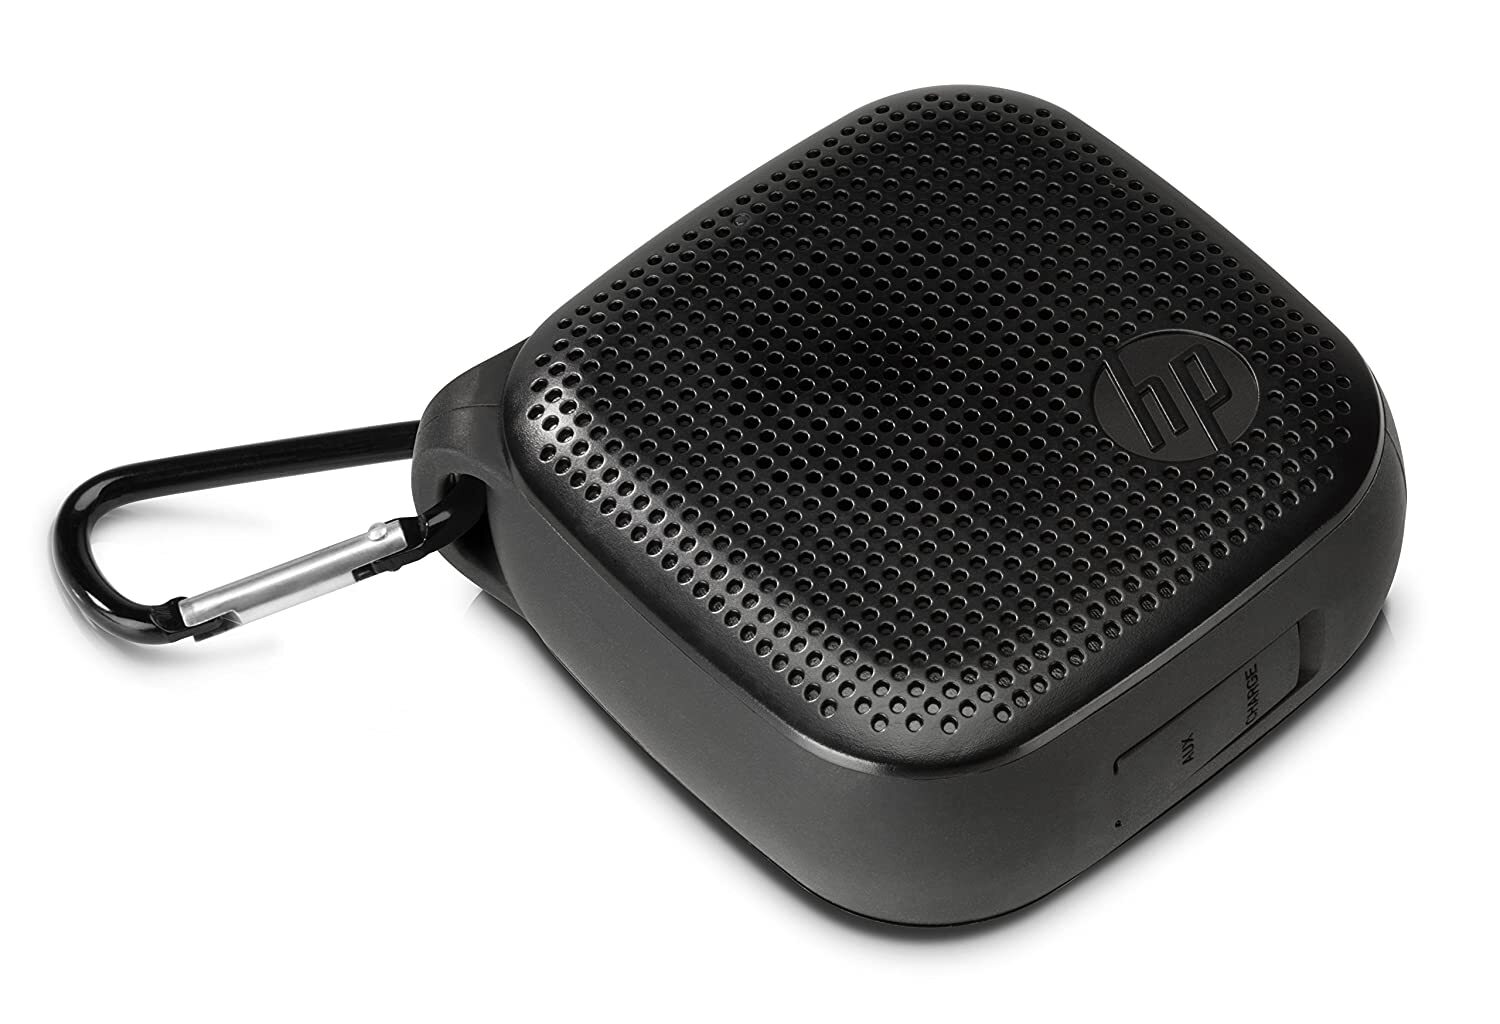 HP Mini 300 Bluetooth Speakers with AUX Connectivity and Splash Resistance, Black